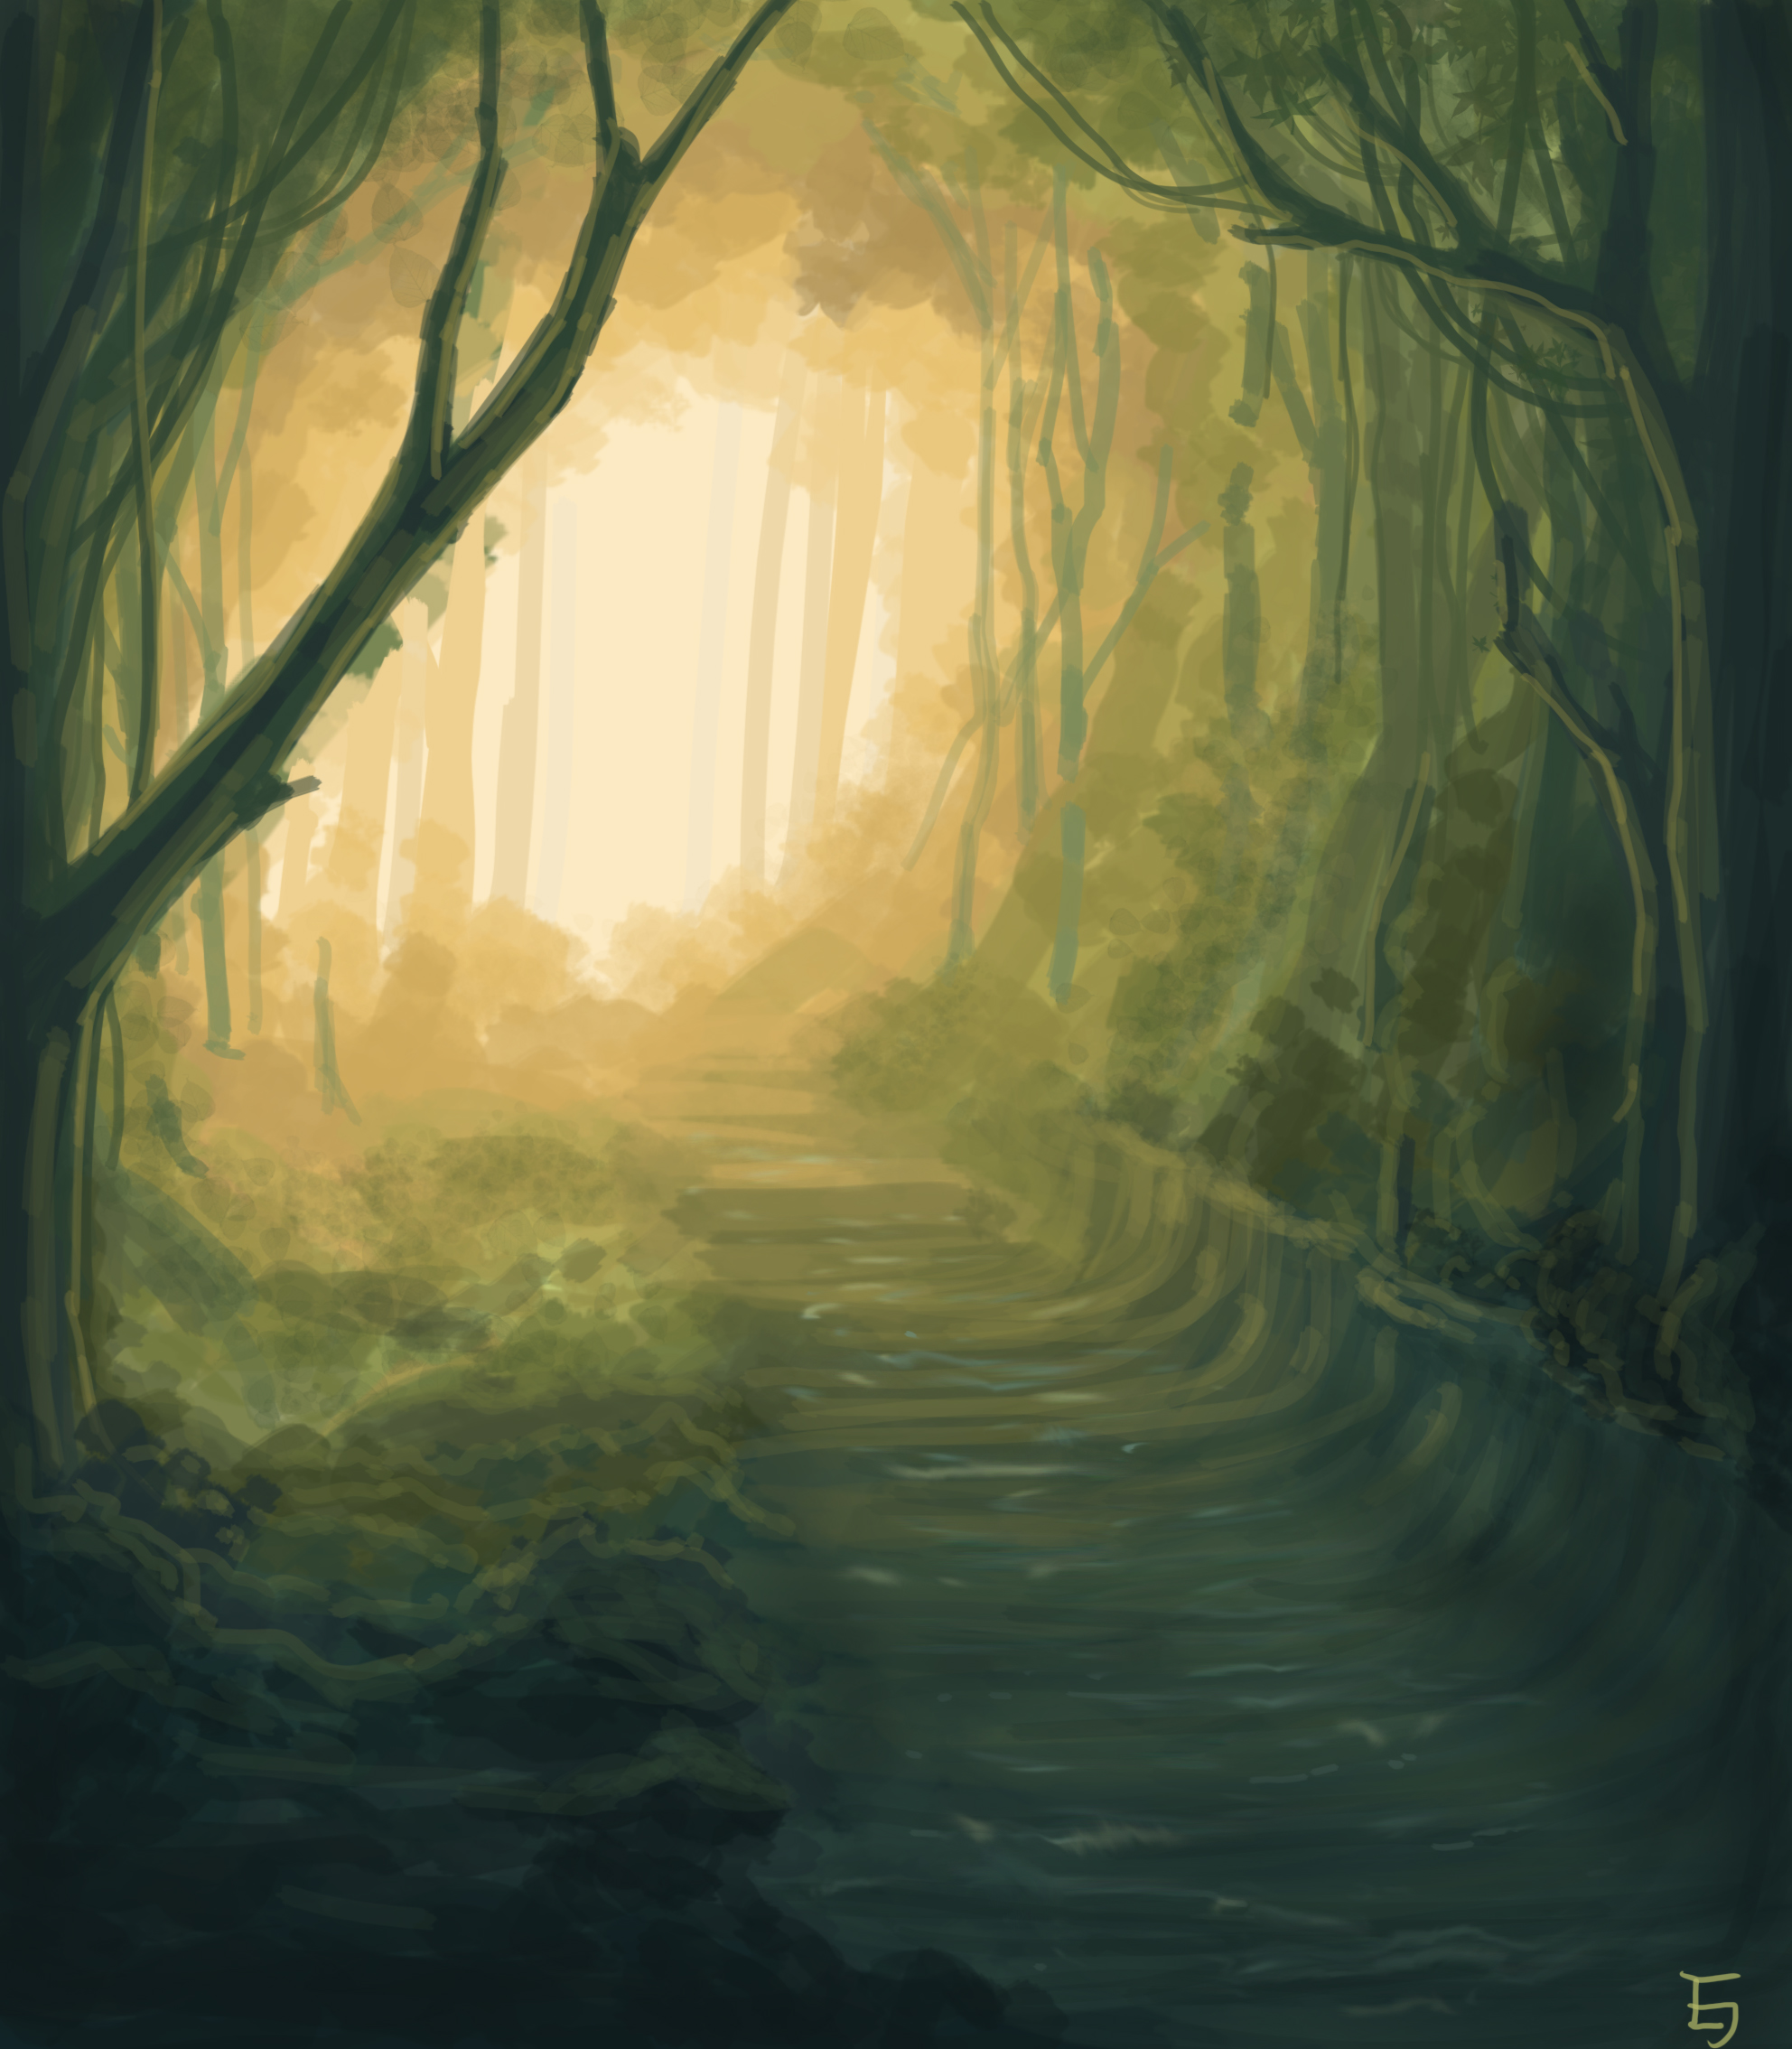 Forest light. Simple environment sketch. Photoshop painting/drawing